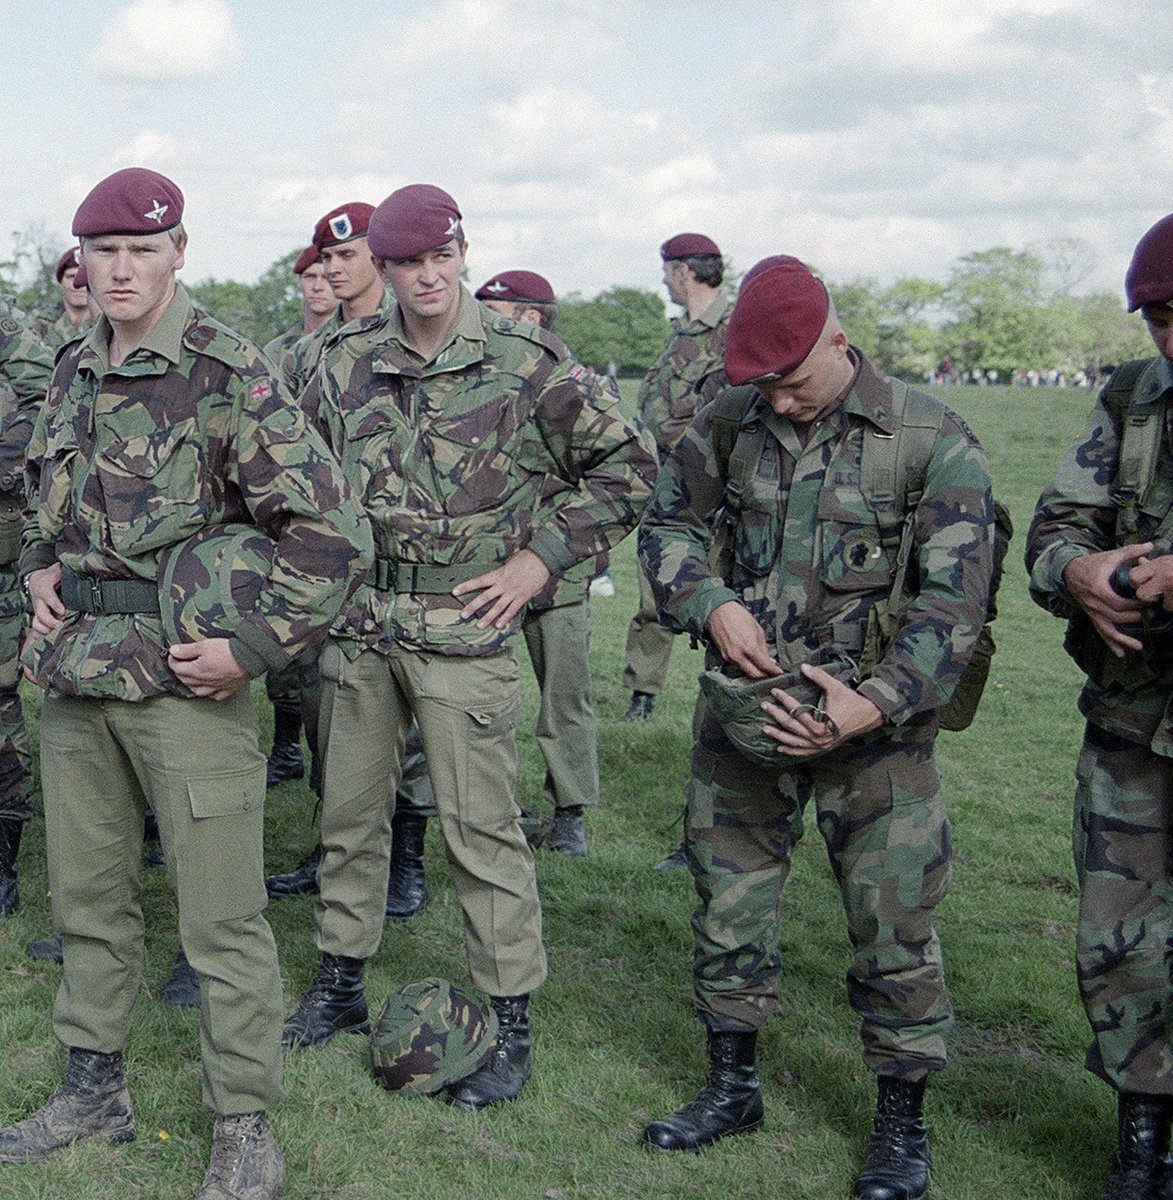 A young Cpl Pendry with members of the #82ndAirborne waiting to jump into Normandy for the #DDay 40th anniversary (1984). I’m going back again for the 80th! Check out the link: bit.ly/3SJuLL4. #paratrooper ⁦@TheParachuteReg⁩ ⁦@82ndABNDiv⁩ ⁦@SSAFA⁩